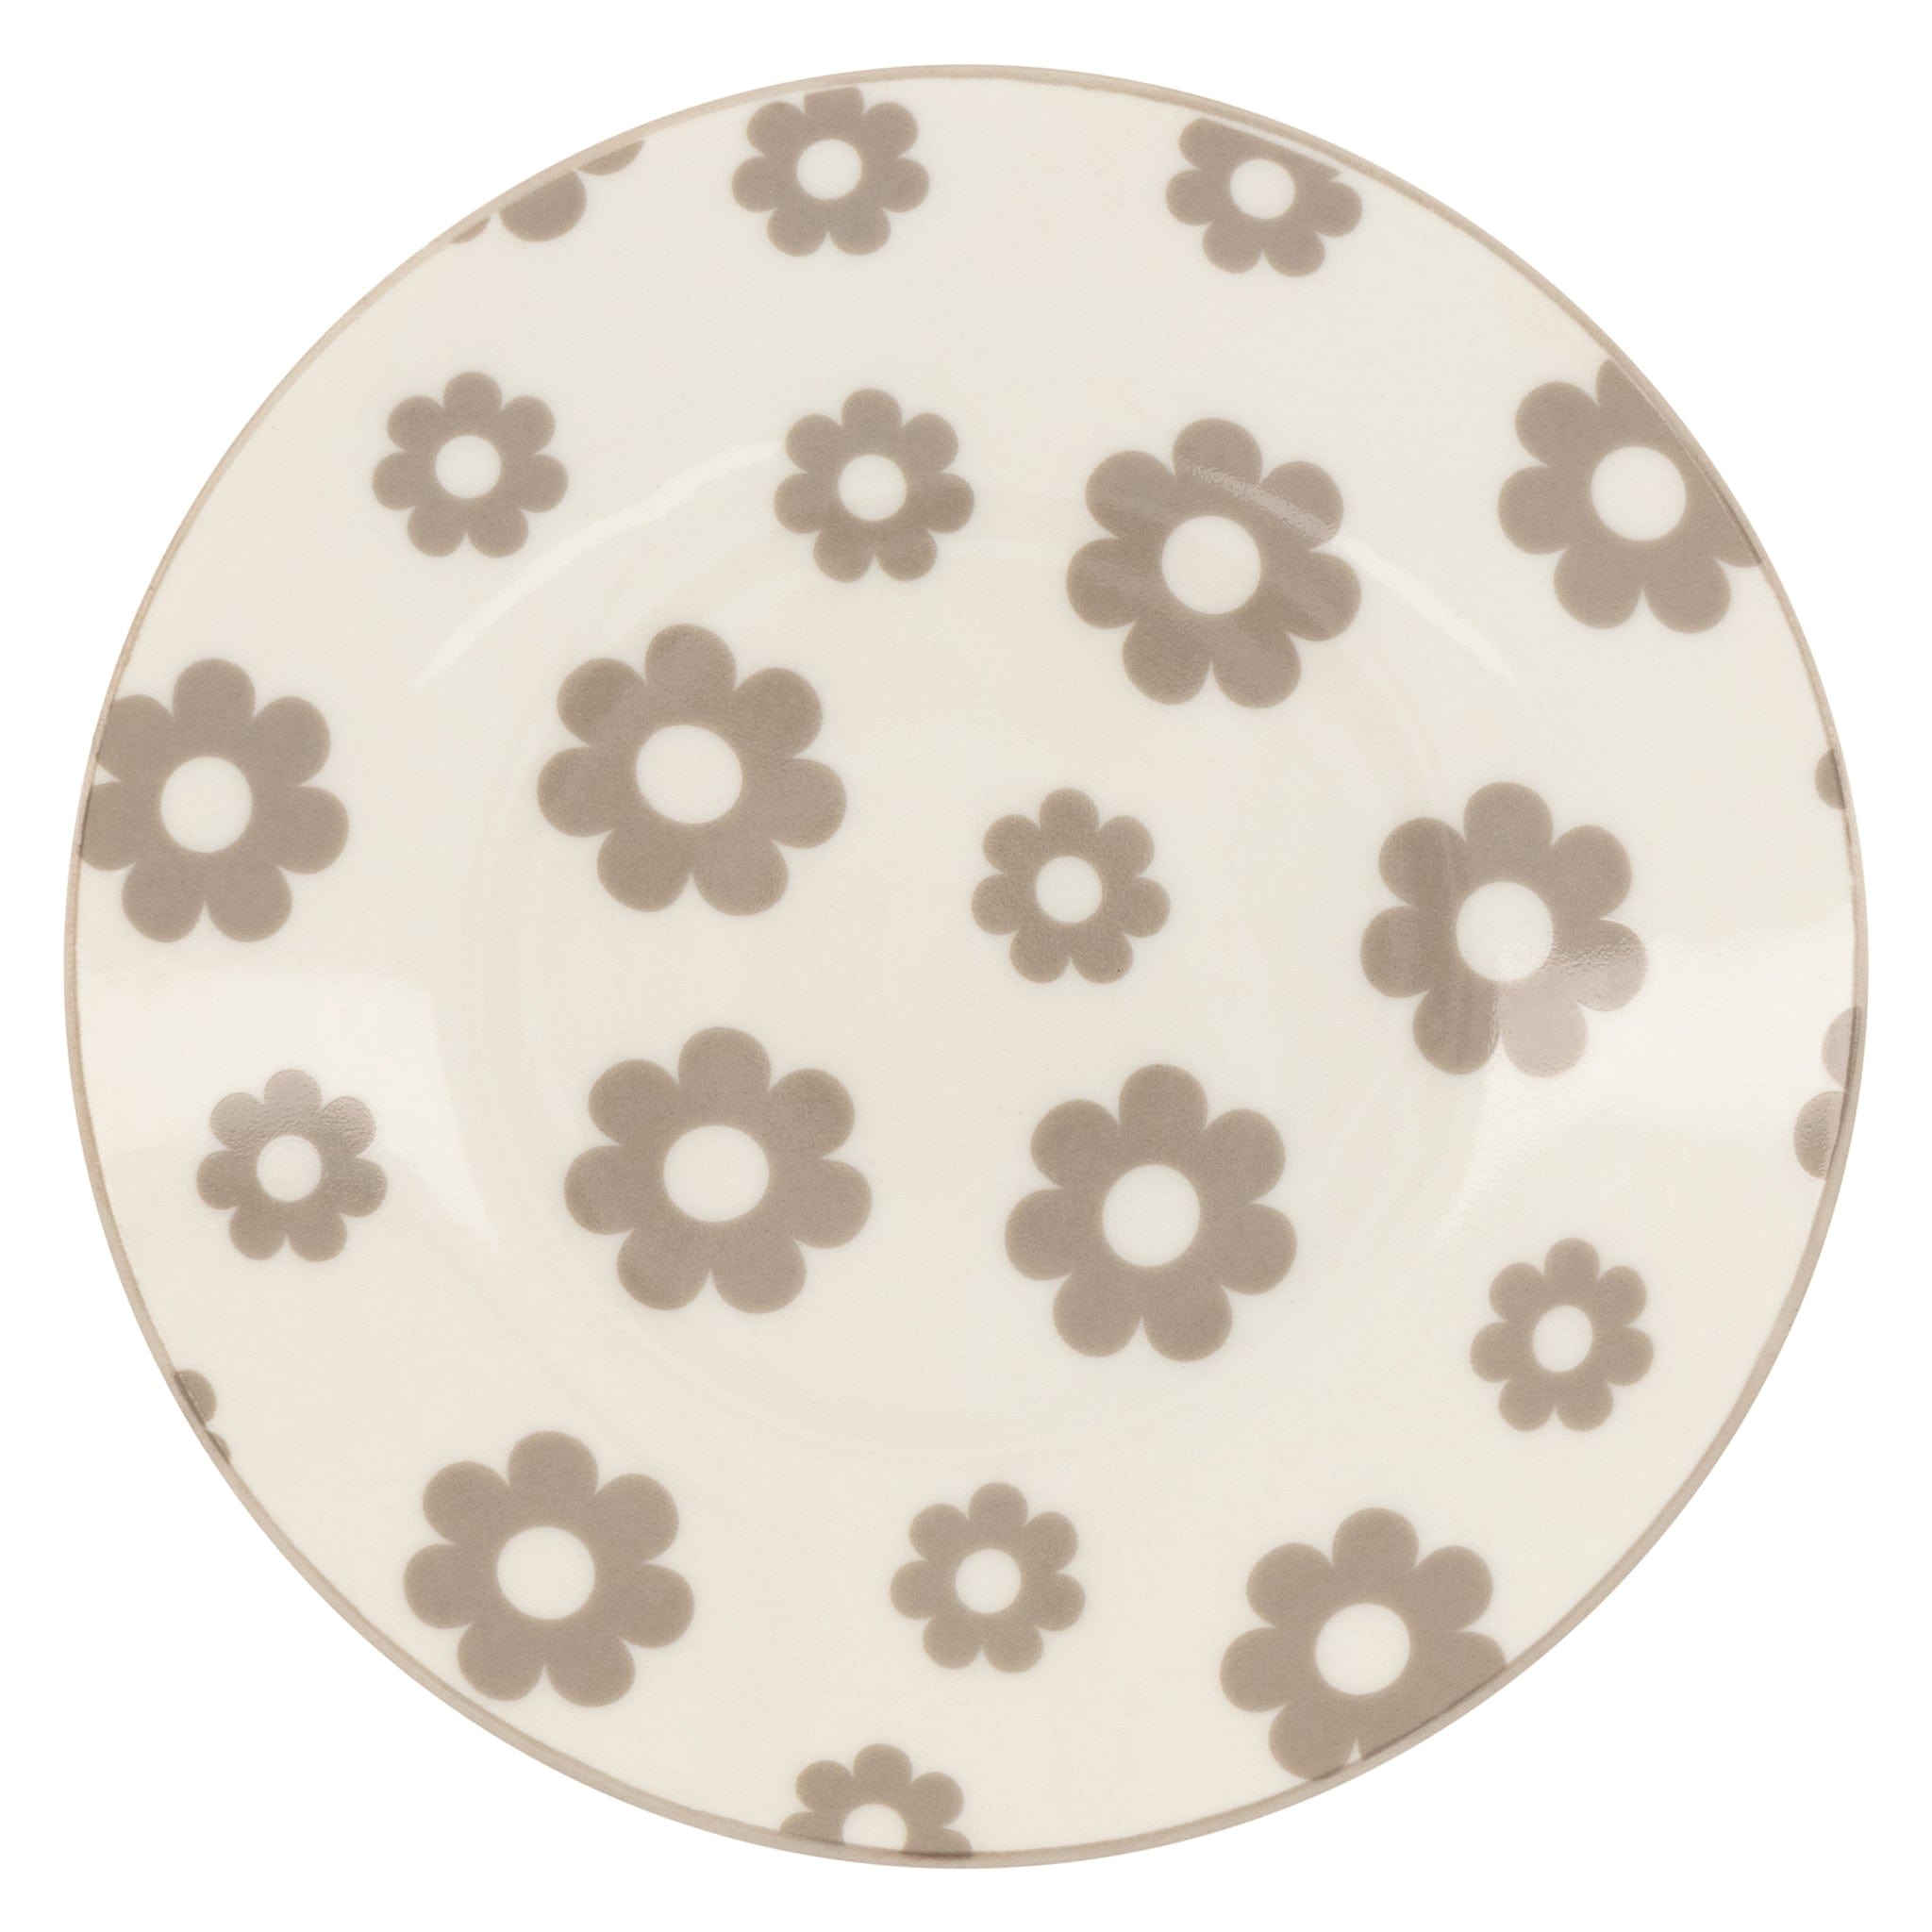 New Bone China Printed 12cm Plate - Taupe Flowers 6926101889709 only5pounds-com